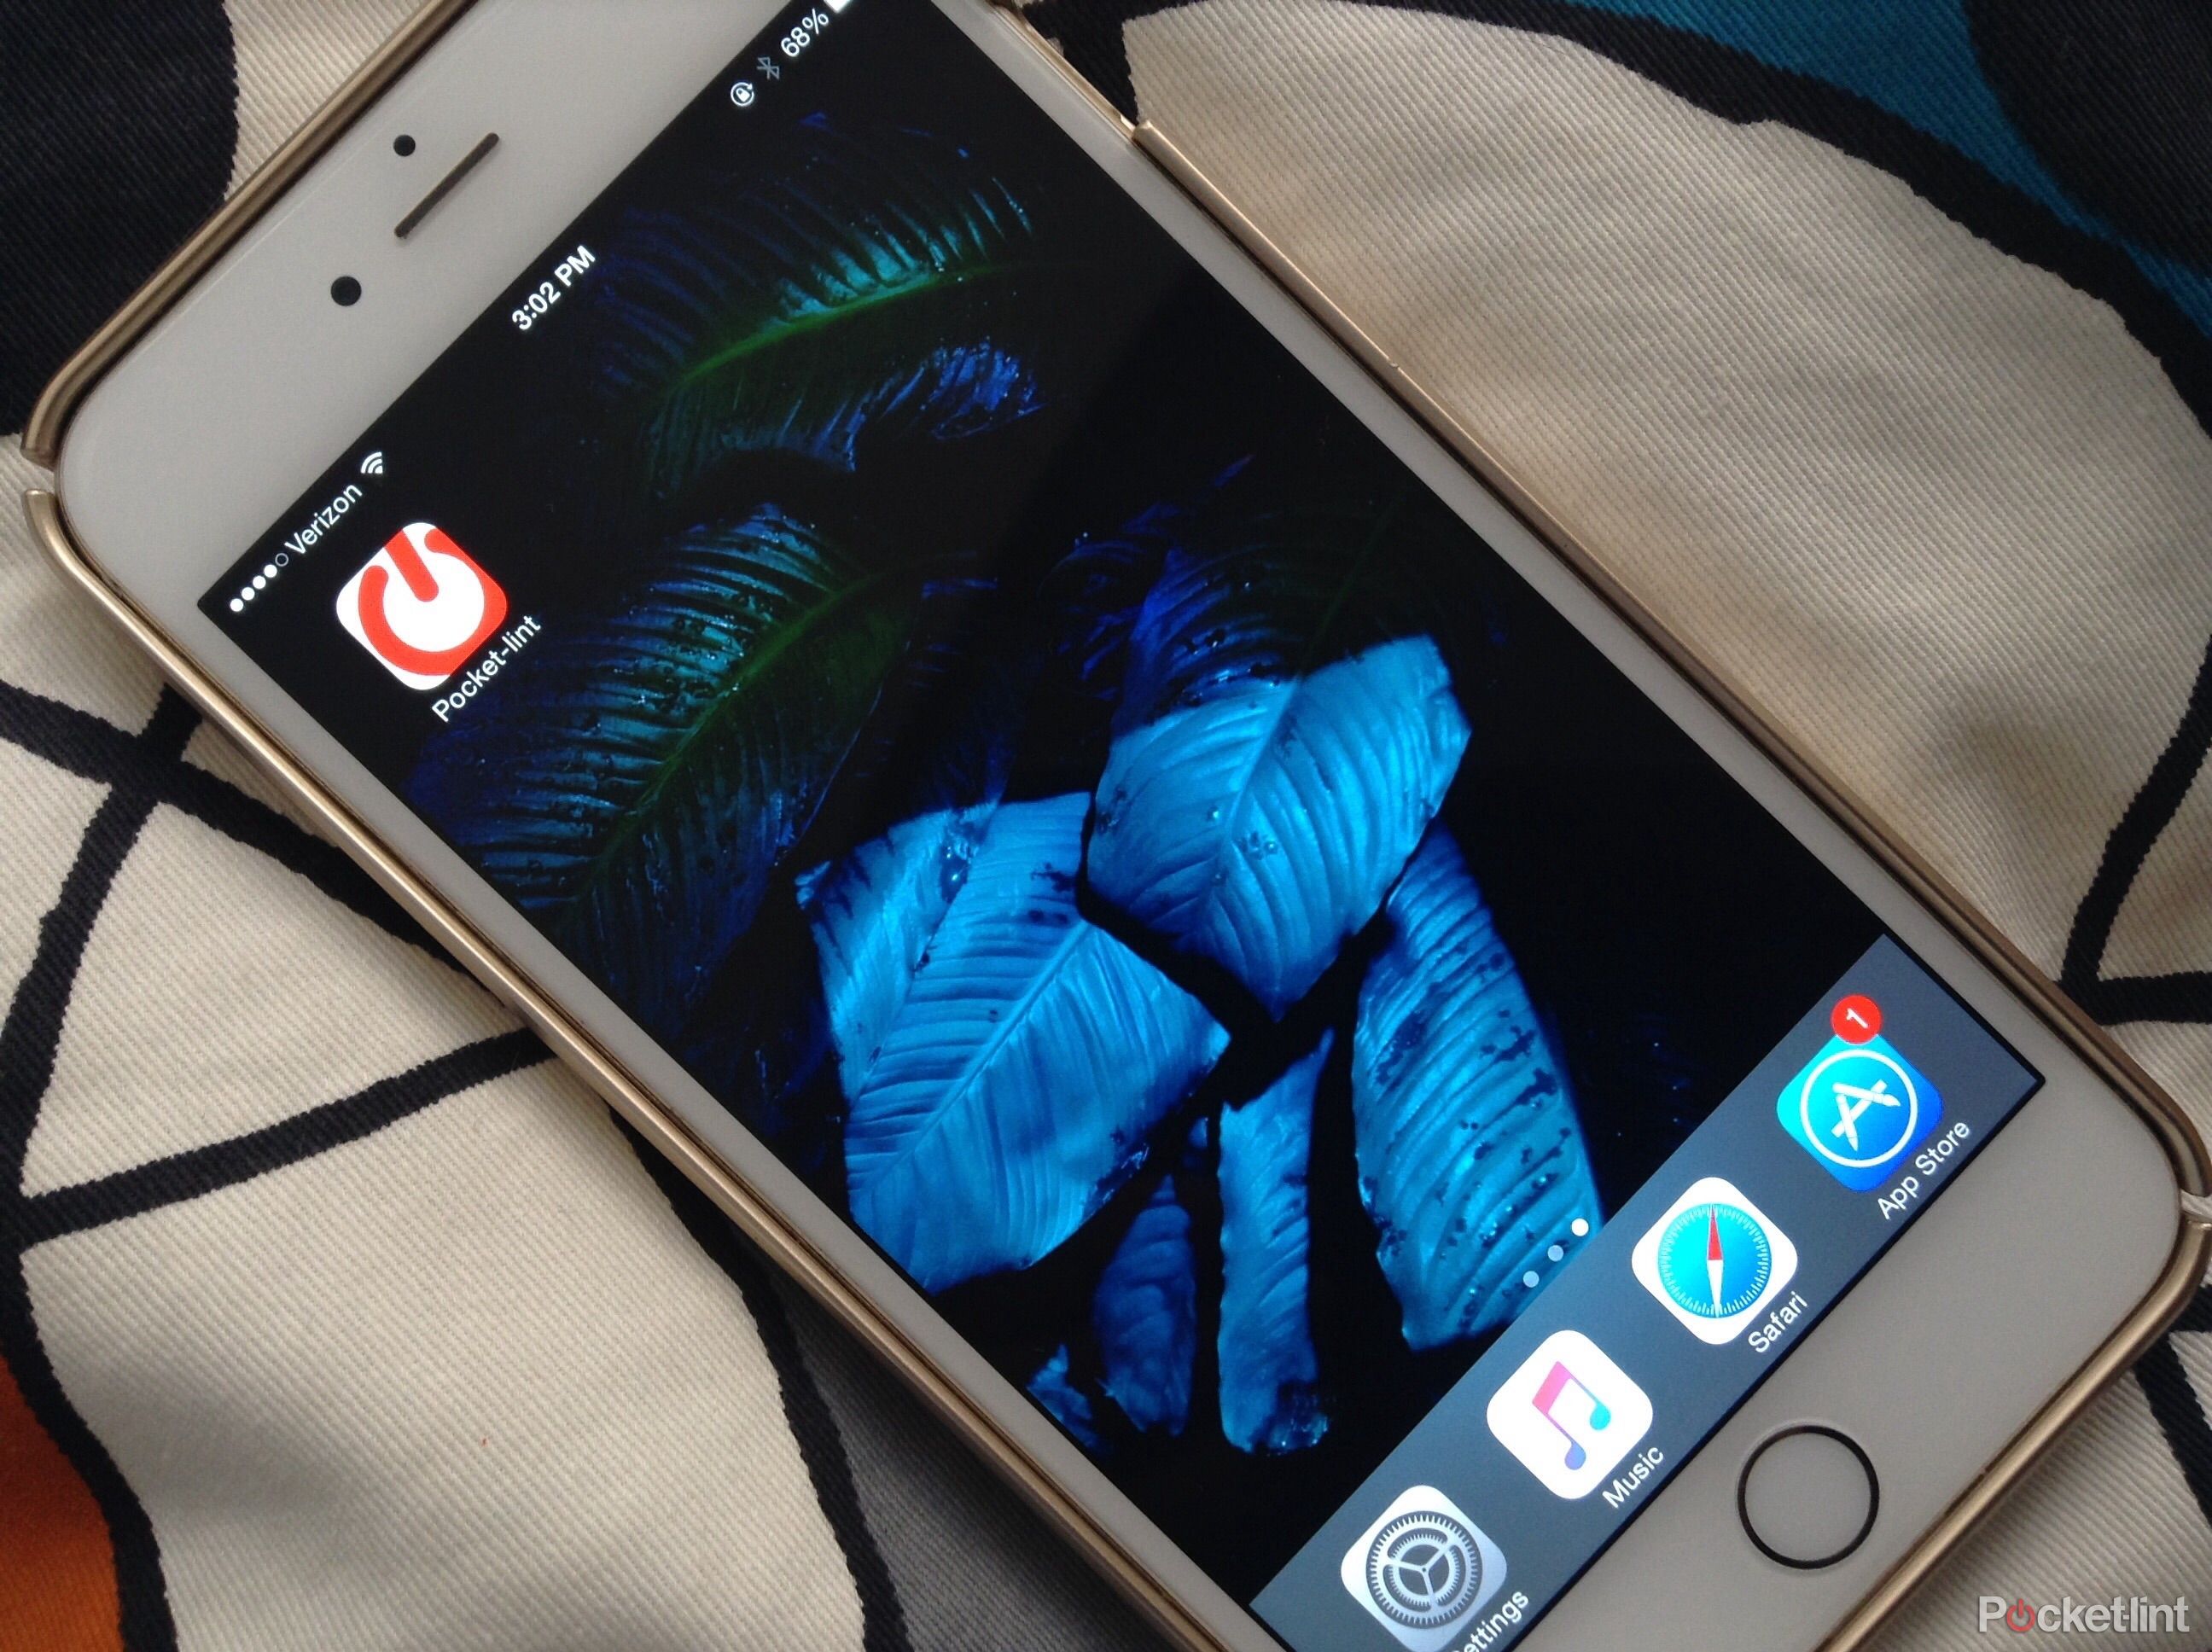 ios 9 s new wallpapers here are the high res downloadable versions image 1